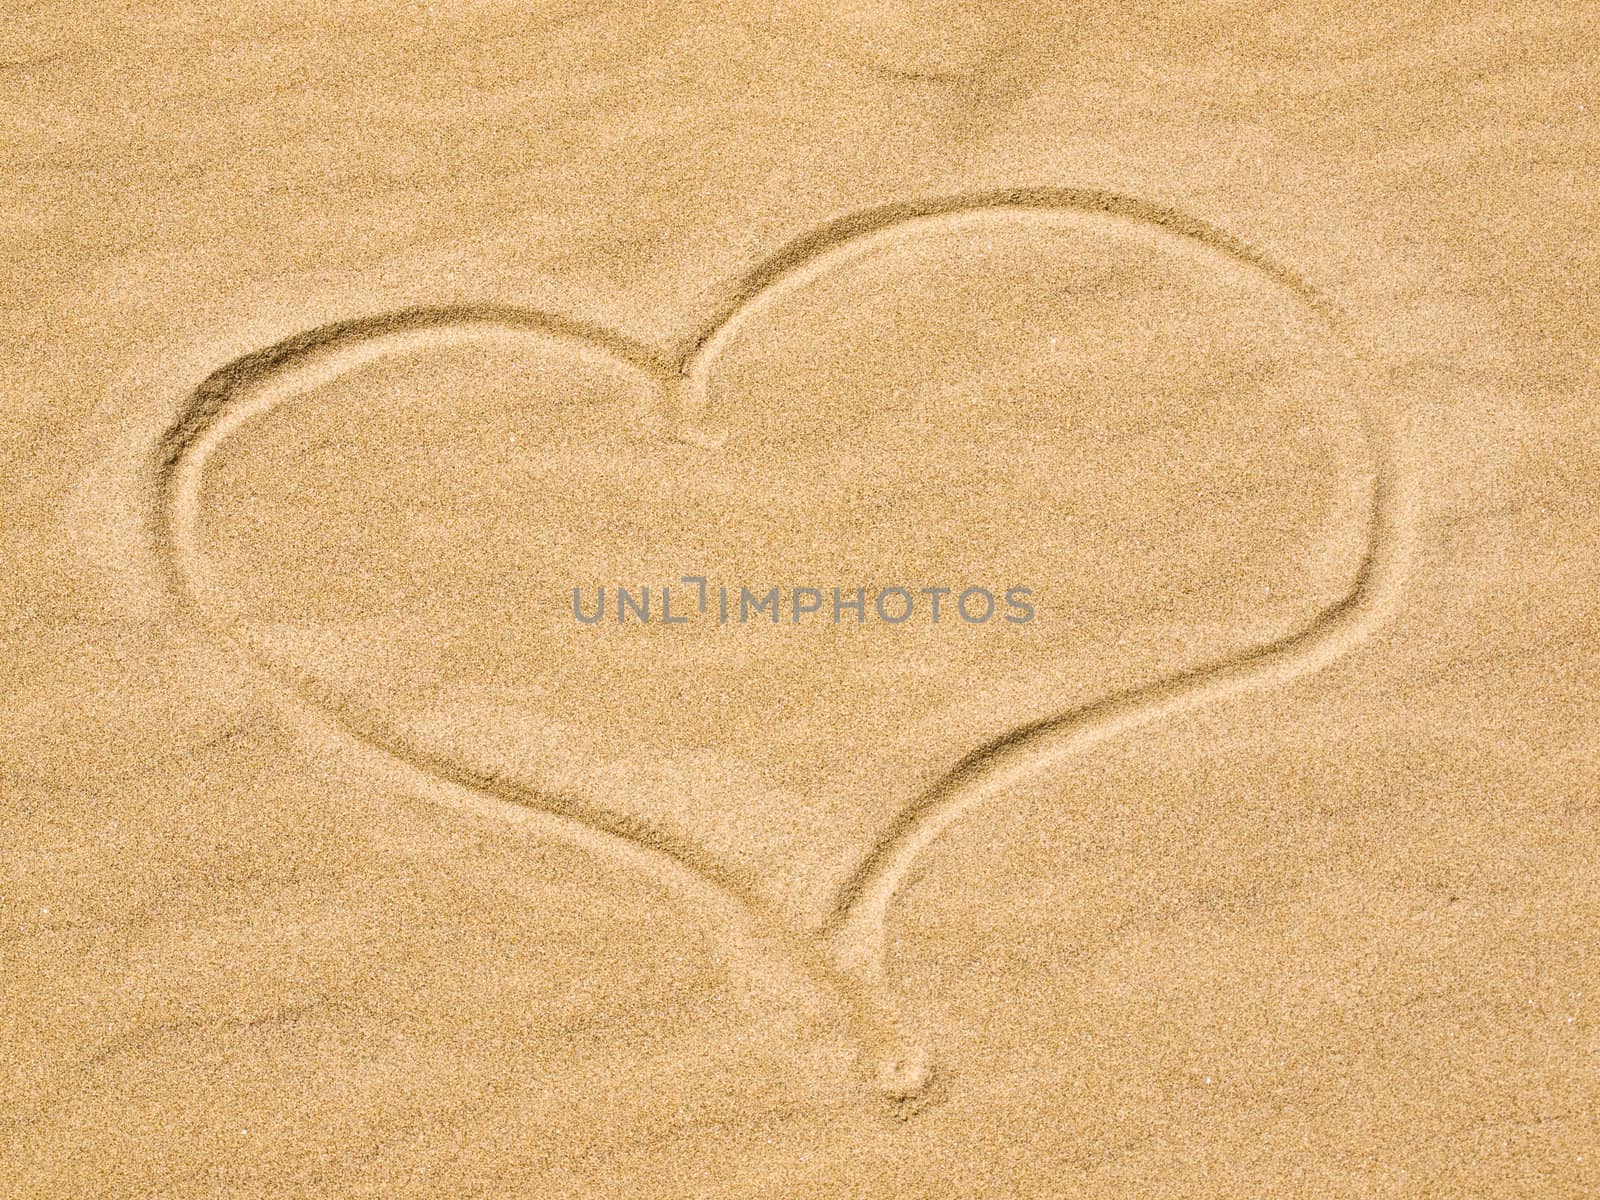 Heart in the Sand on a Sunny Day by Frankljunior